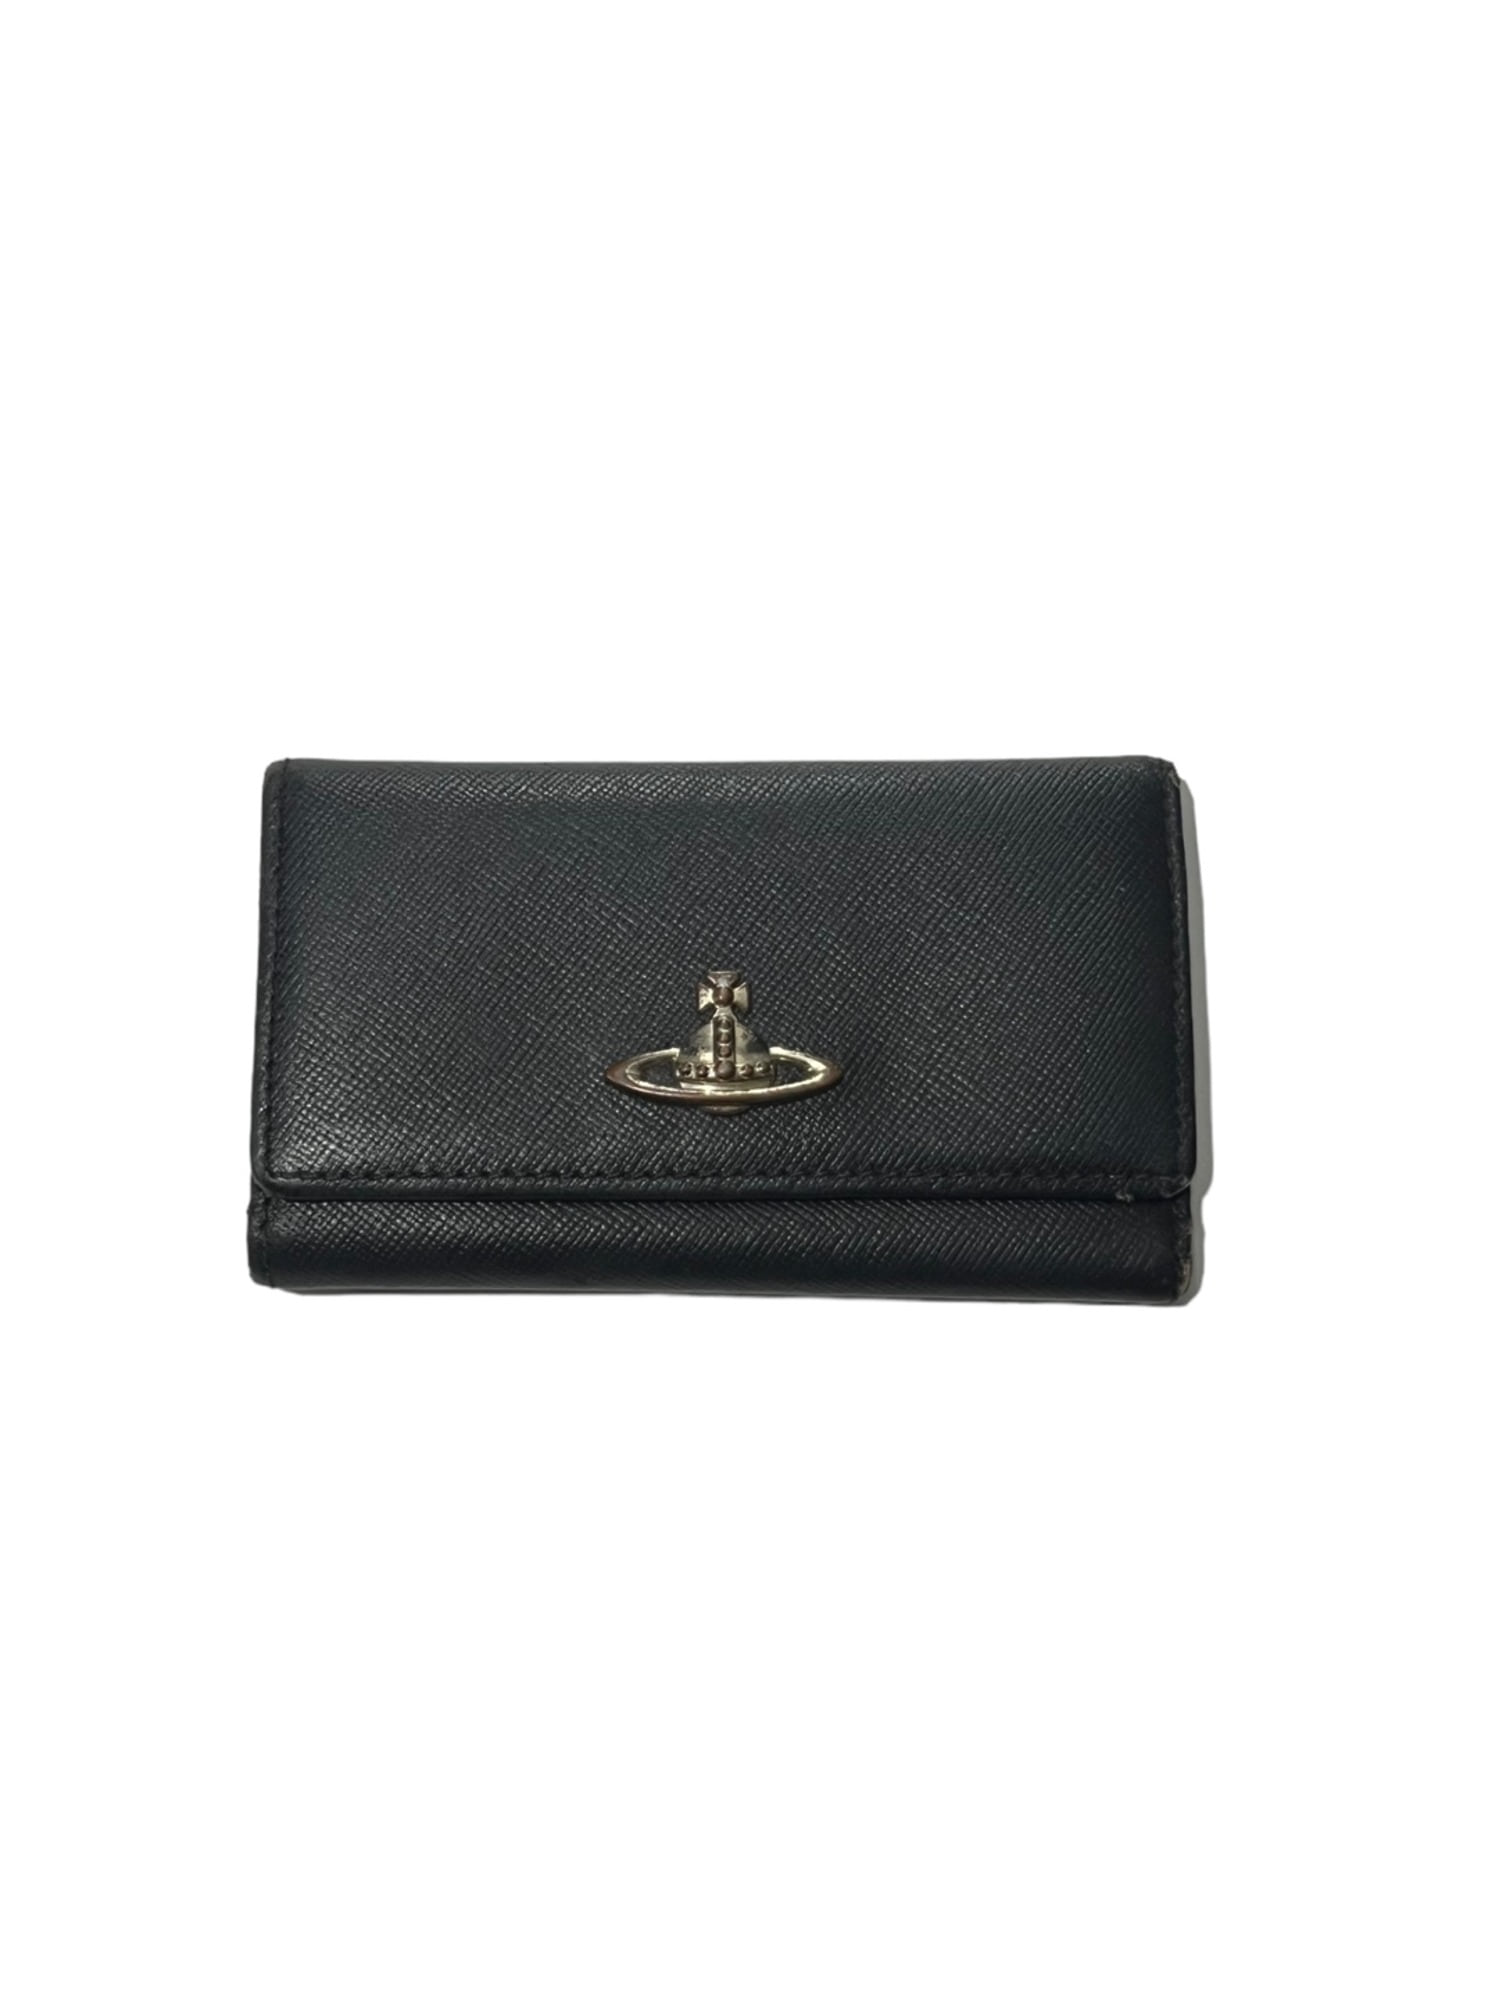 Vivienne Wsetwood Logo Leather Key Case Wallet (Condition 9/10)